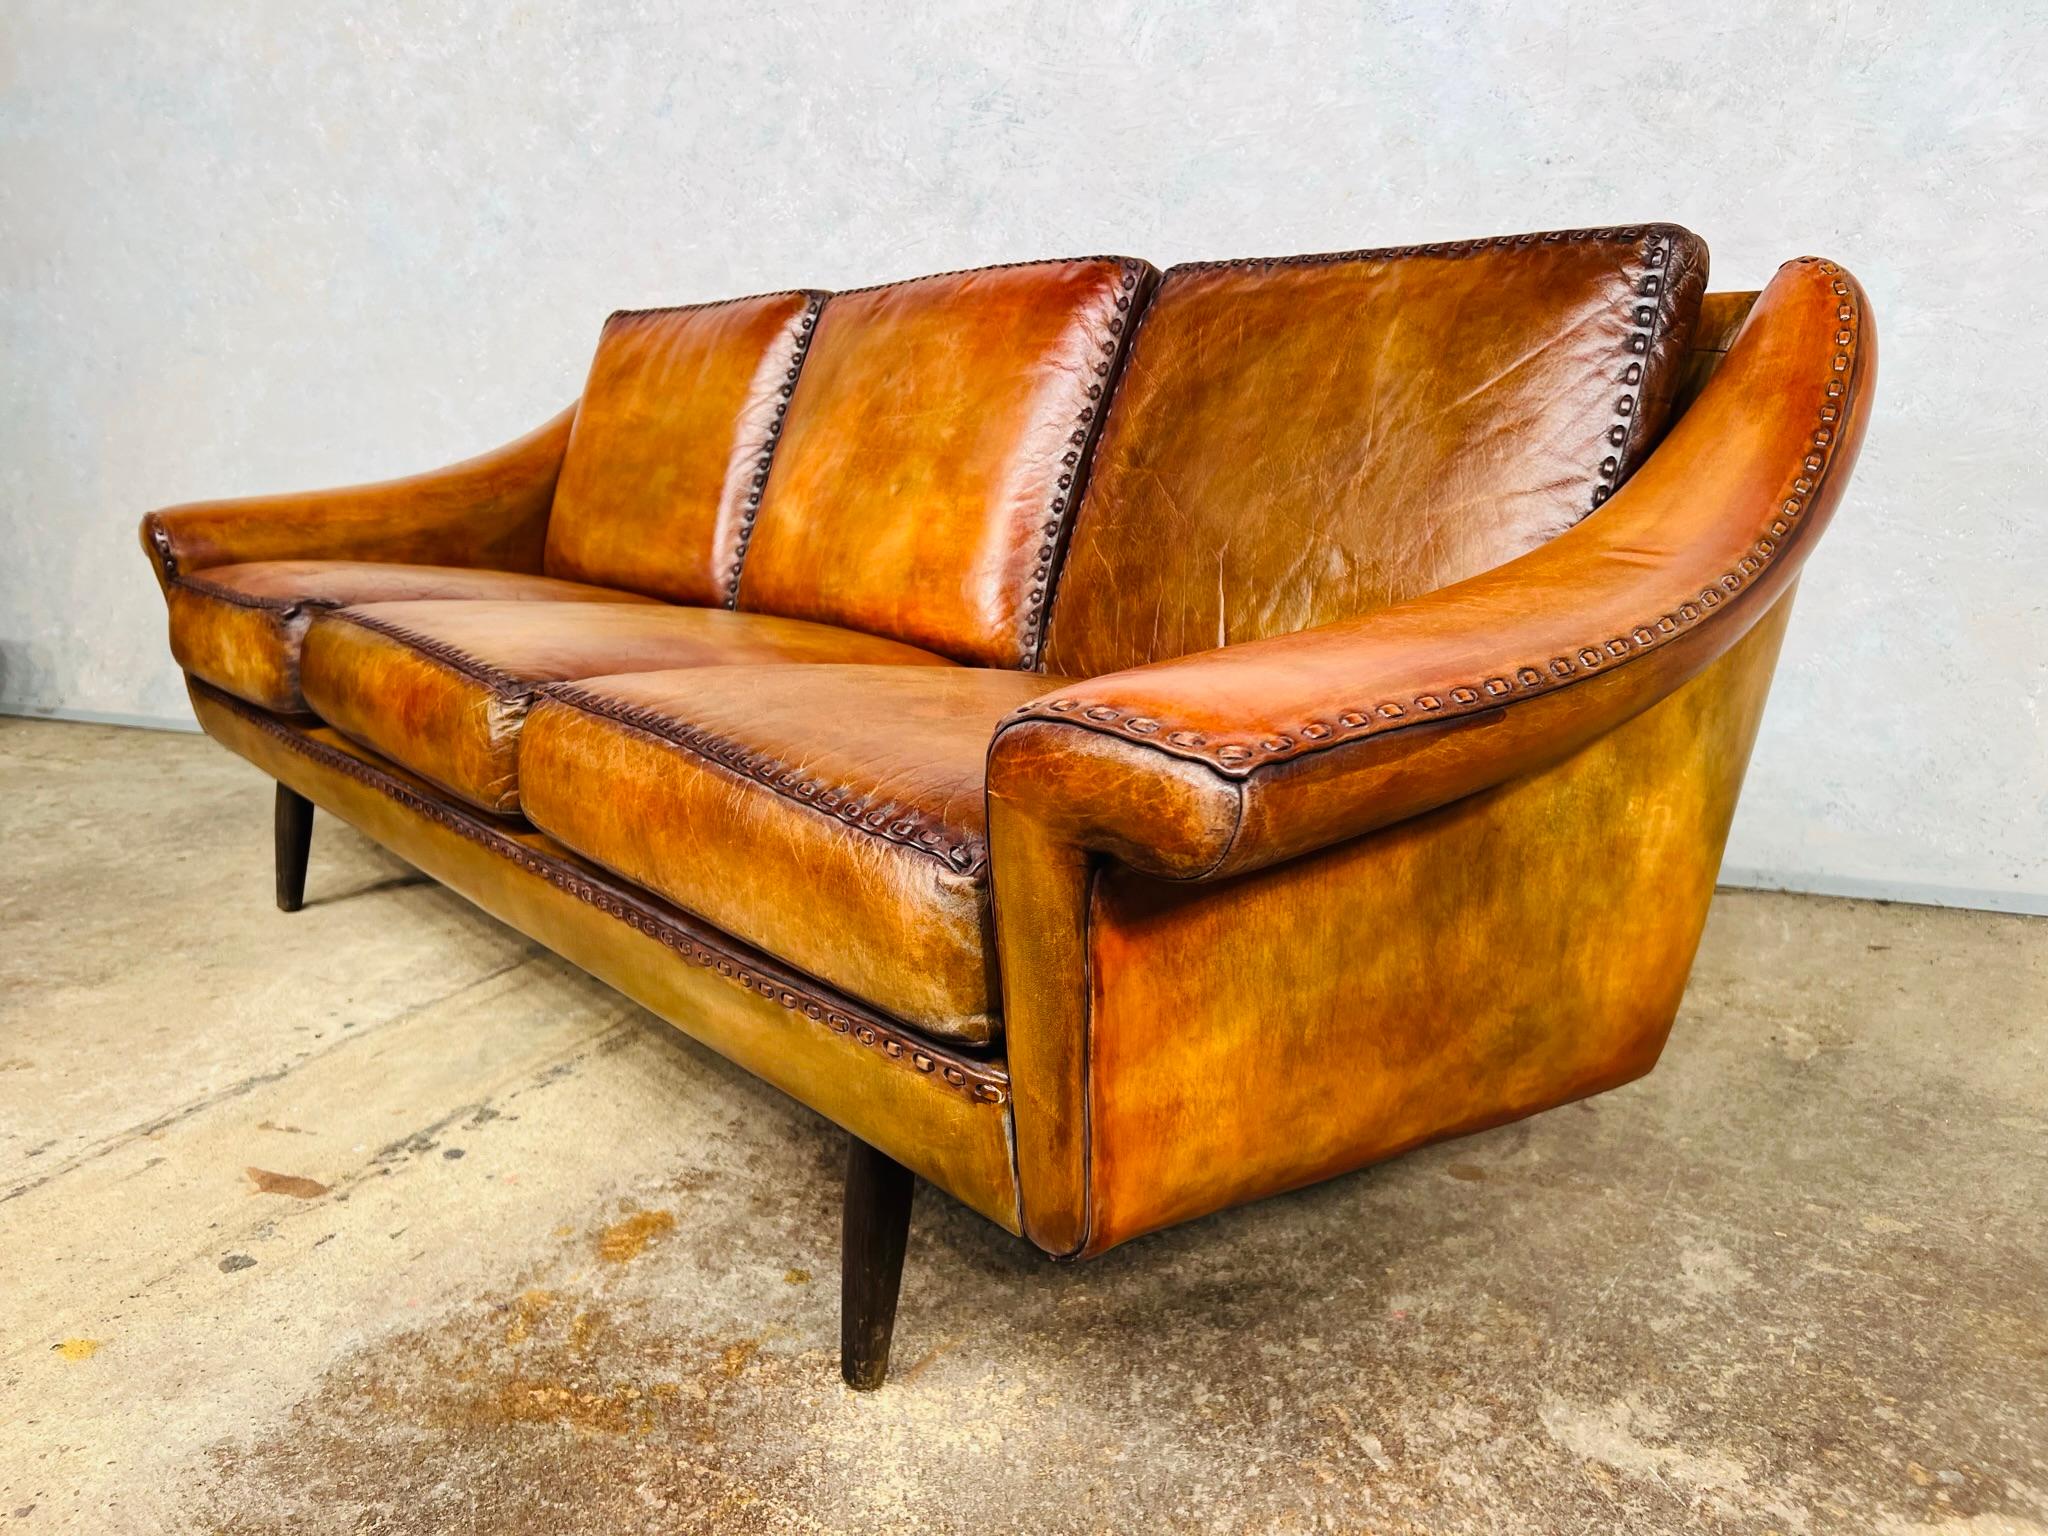 Matador Leather 3 Seater Sofa by Aage Christiansen for Eran 1960s #642 For Sale 8